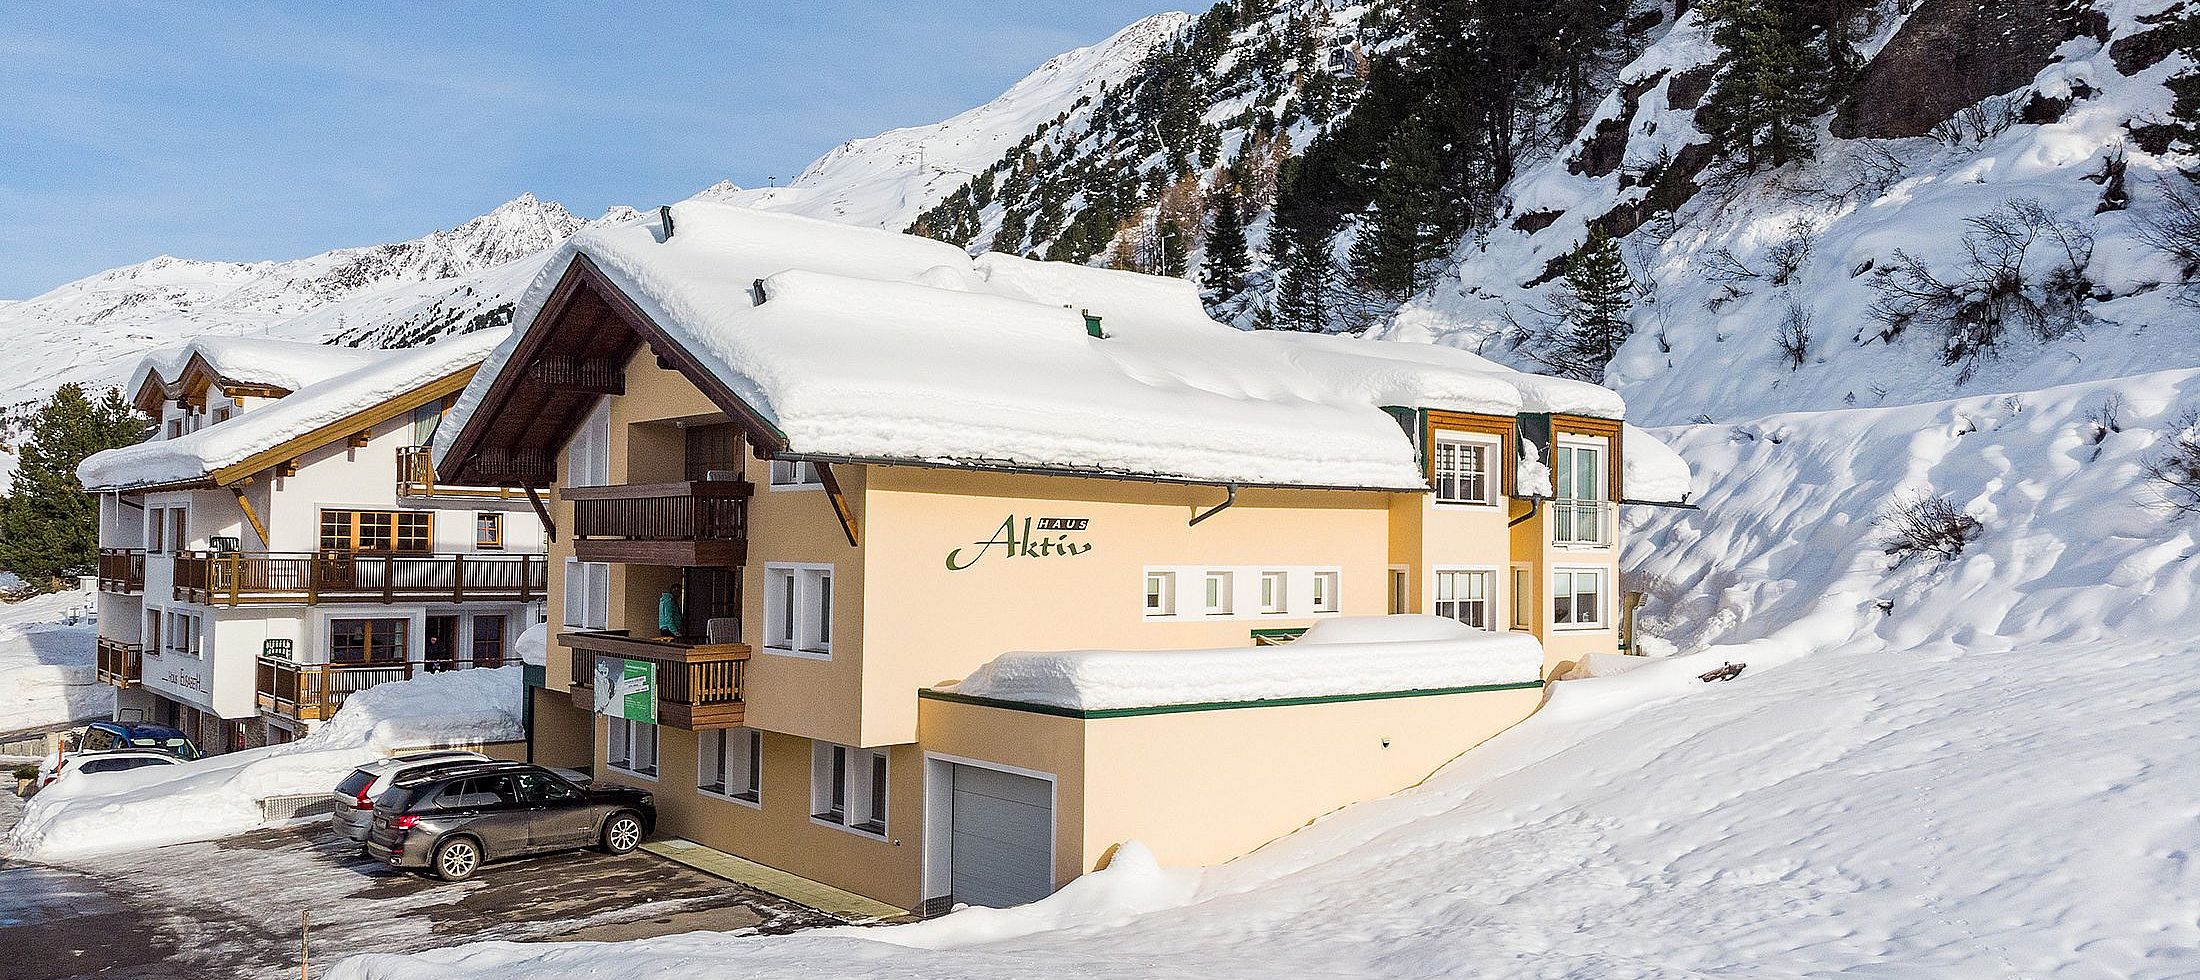 Haus-Aktiv in Gurgl from the outside